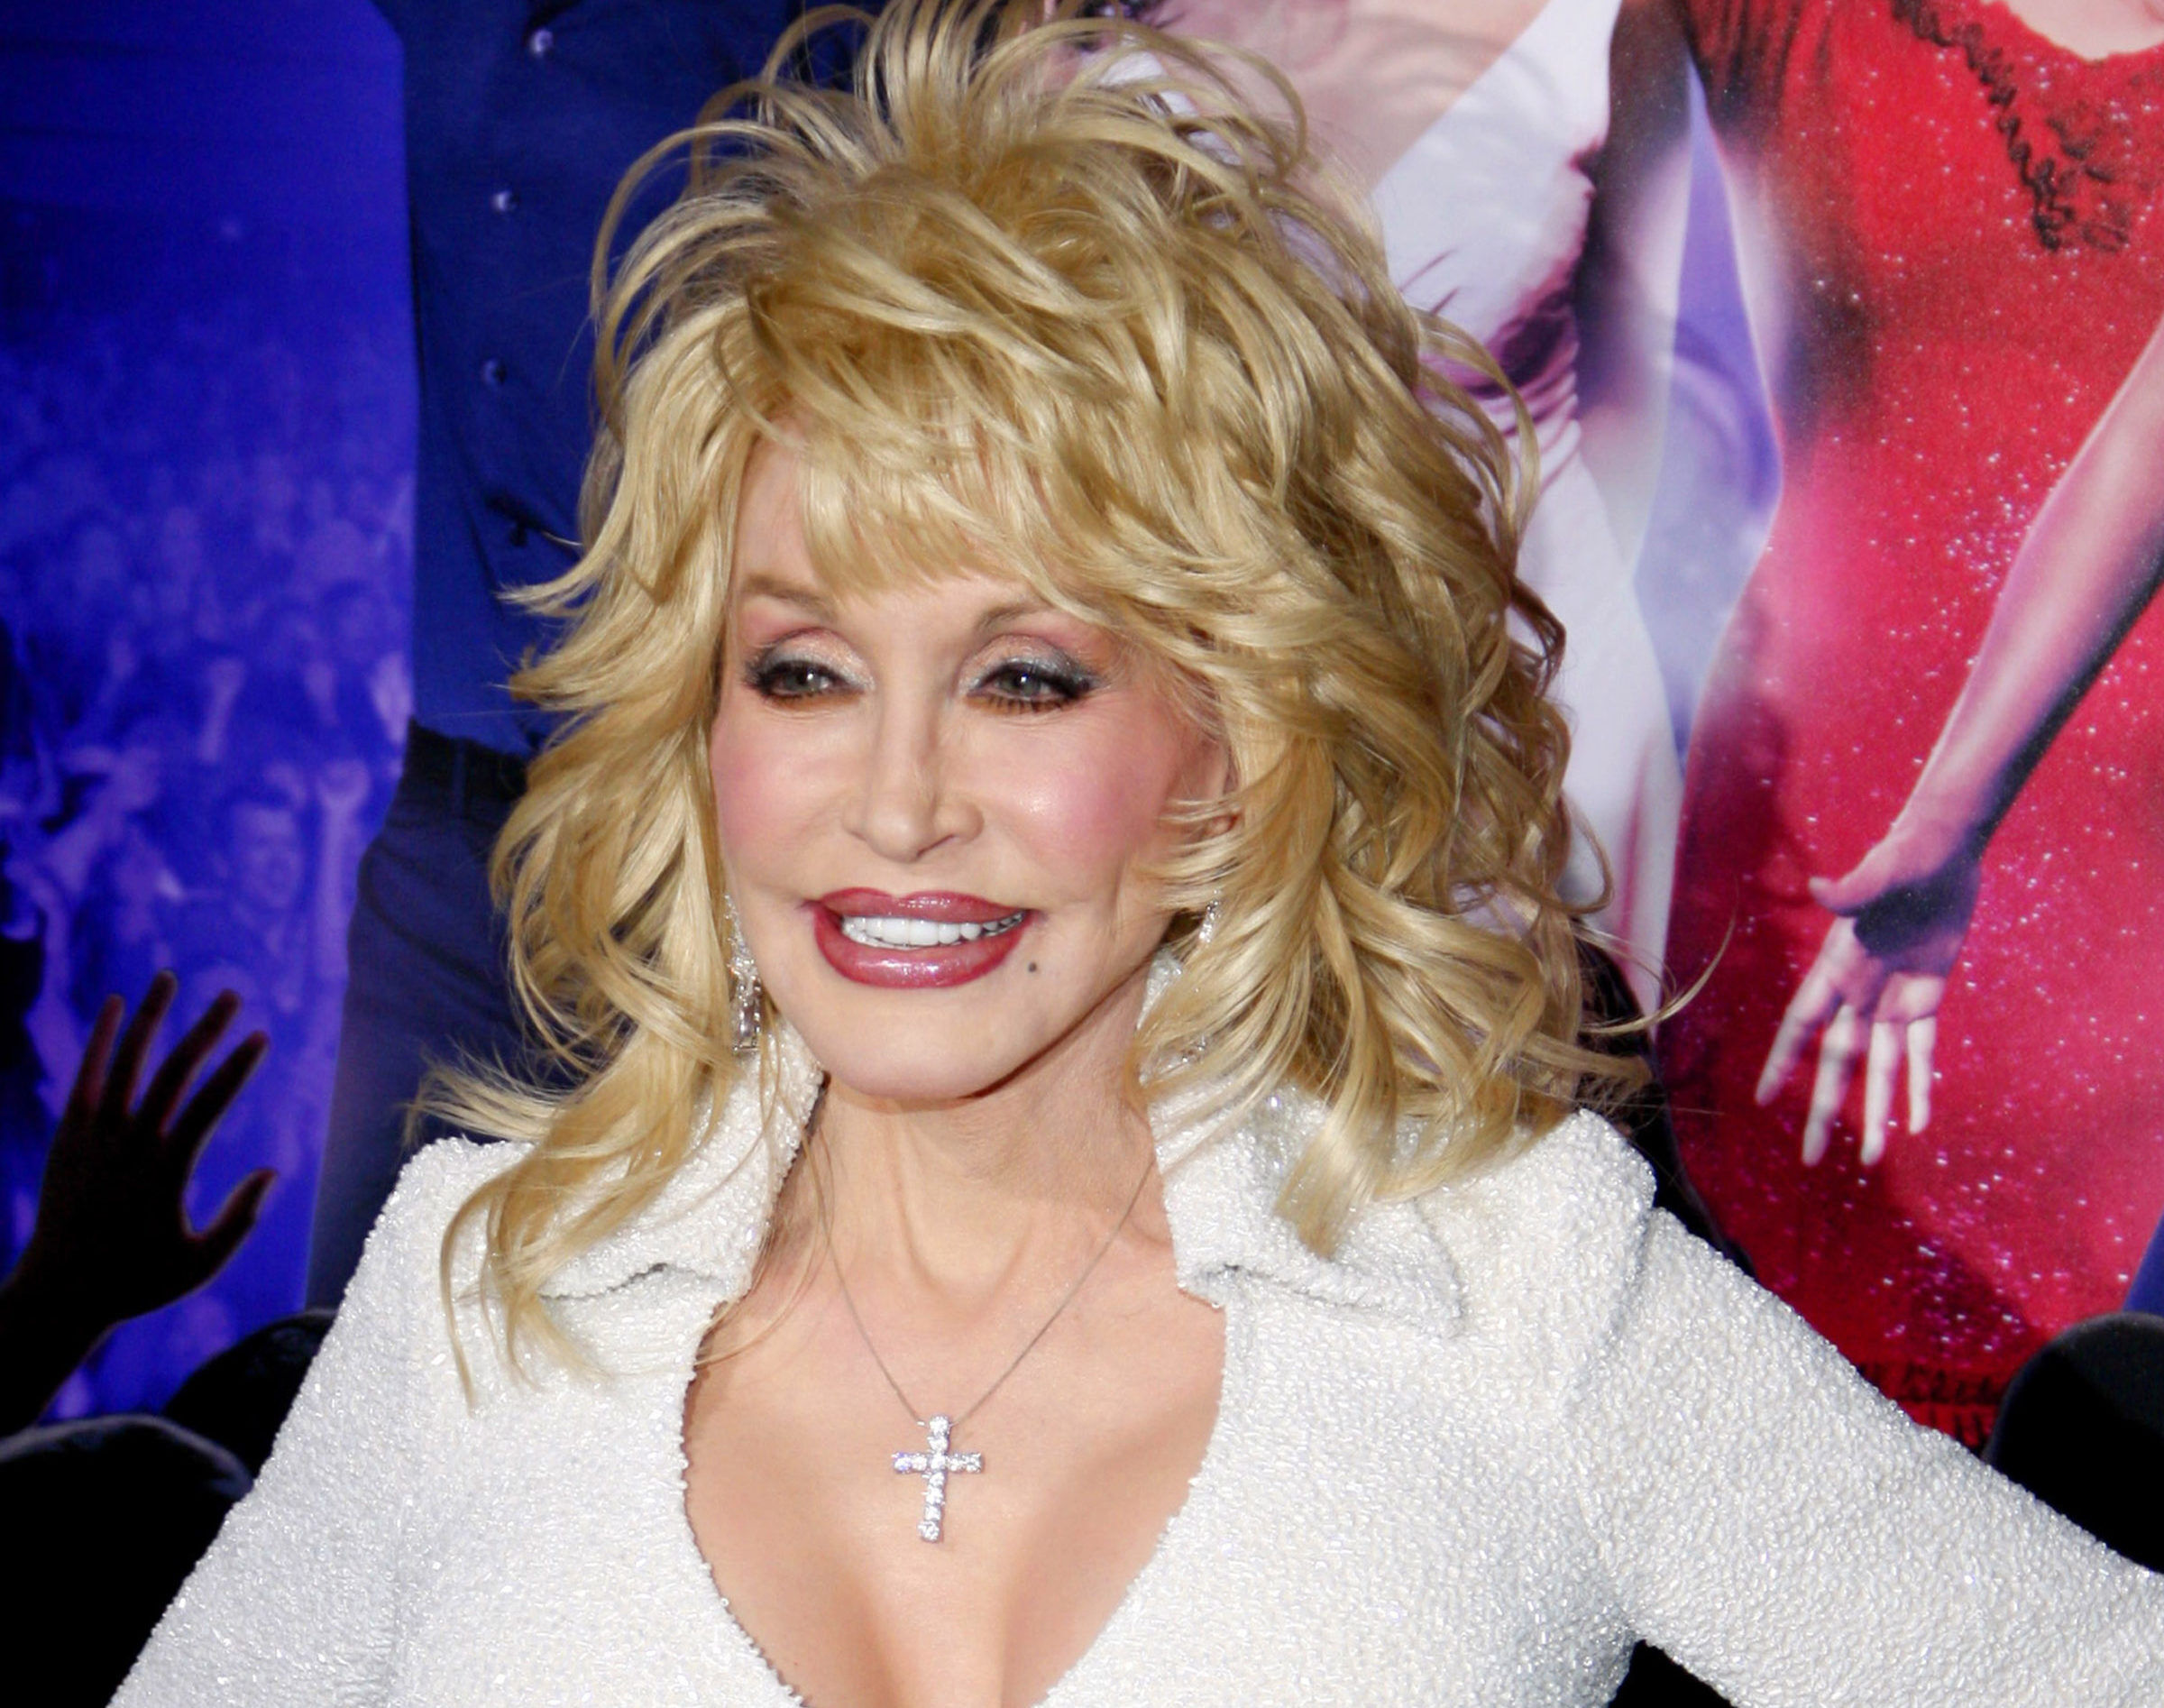 Dolly Parton at the Los Angeles Premiere of "Joyful Noise" held at the Grauman's Chinese Theater in Los Angeles, California, United States on January 9, 2012.